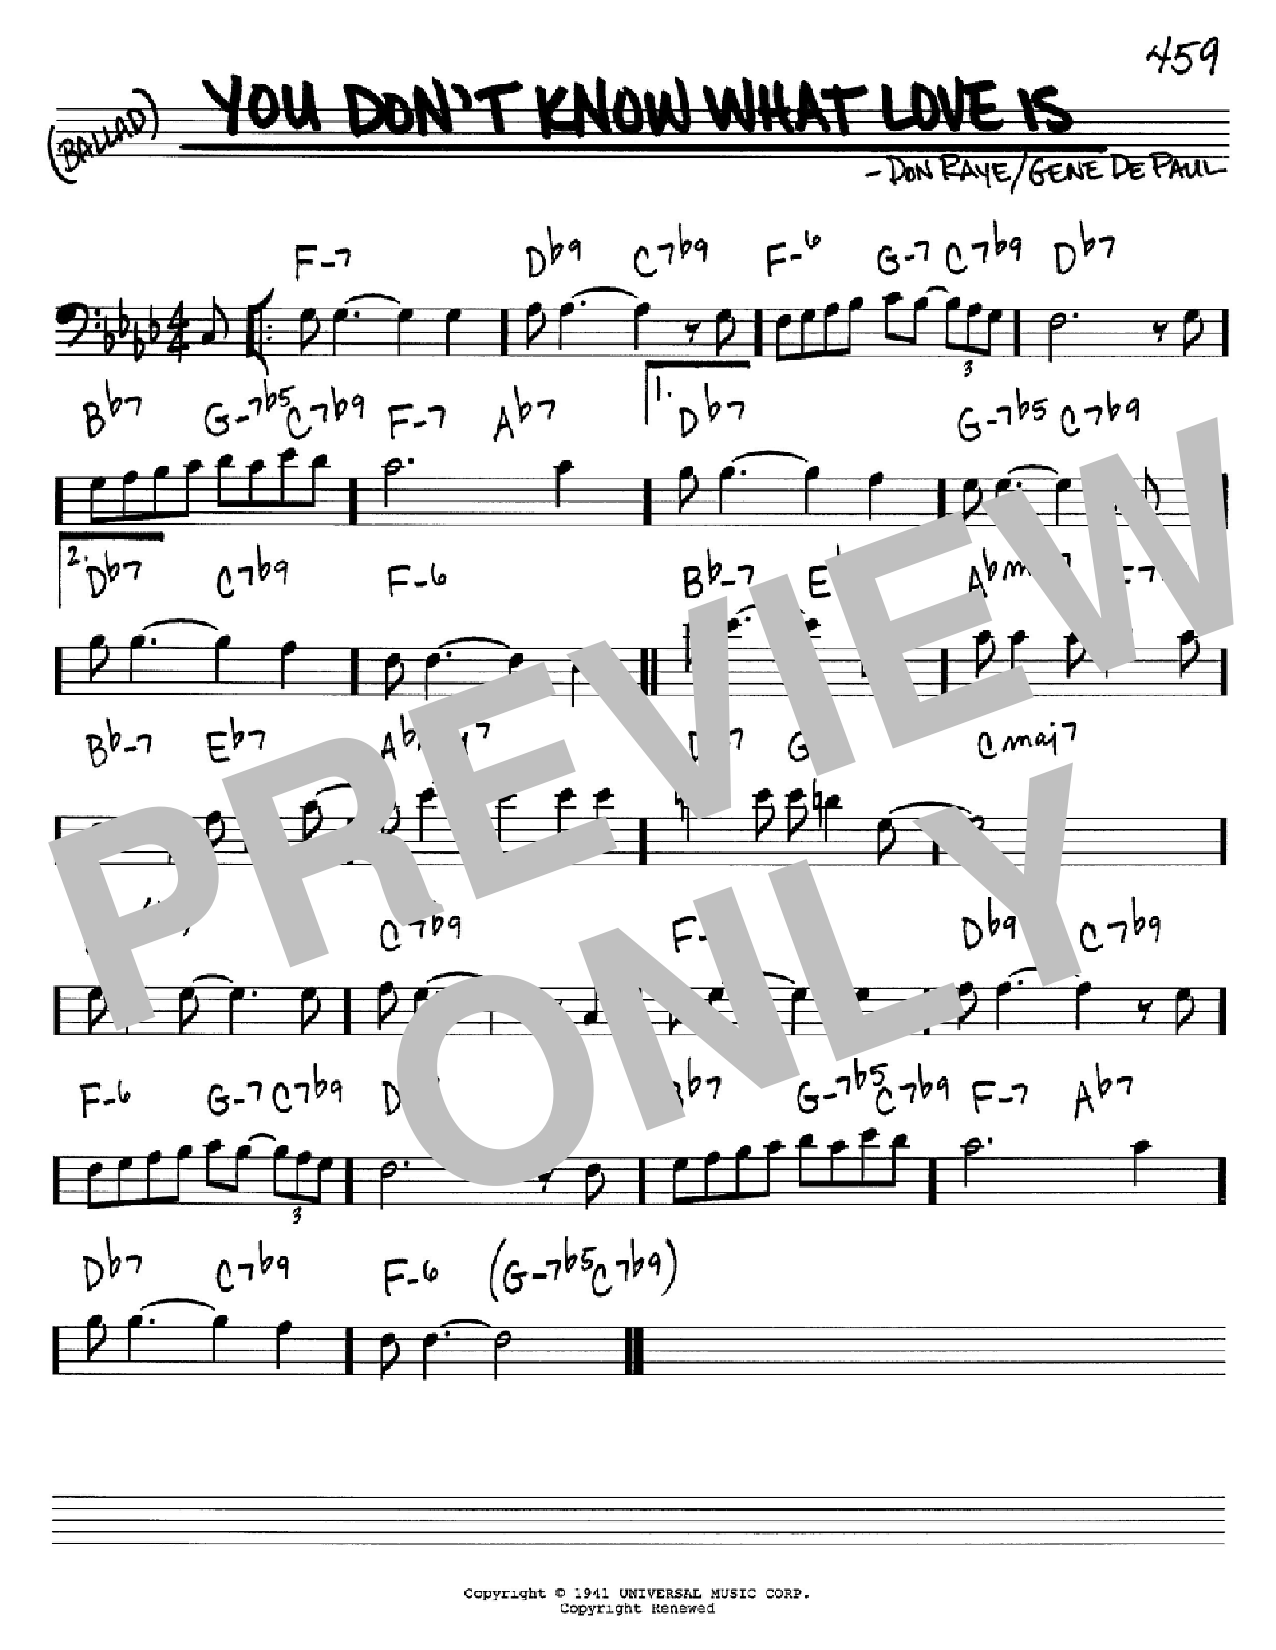 Download Carol Bruce You Don't Know What Love Is Sheet Music